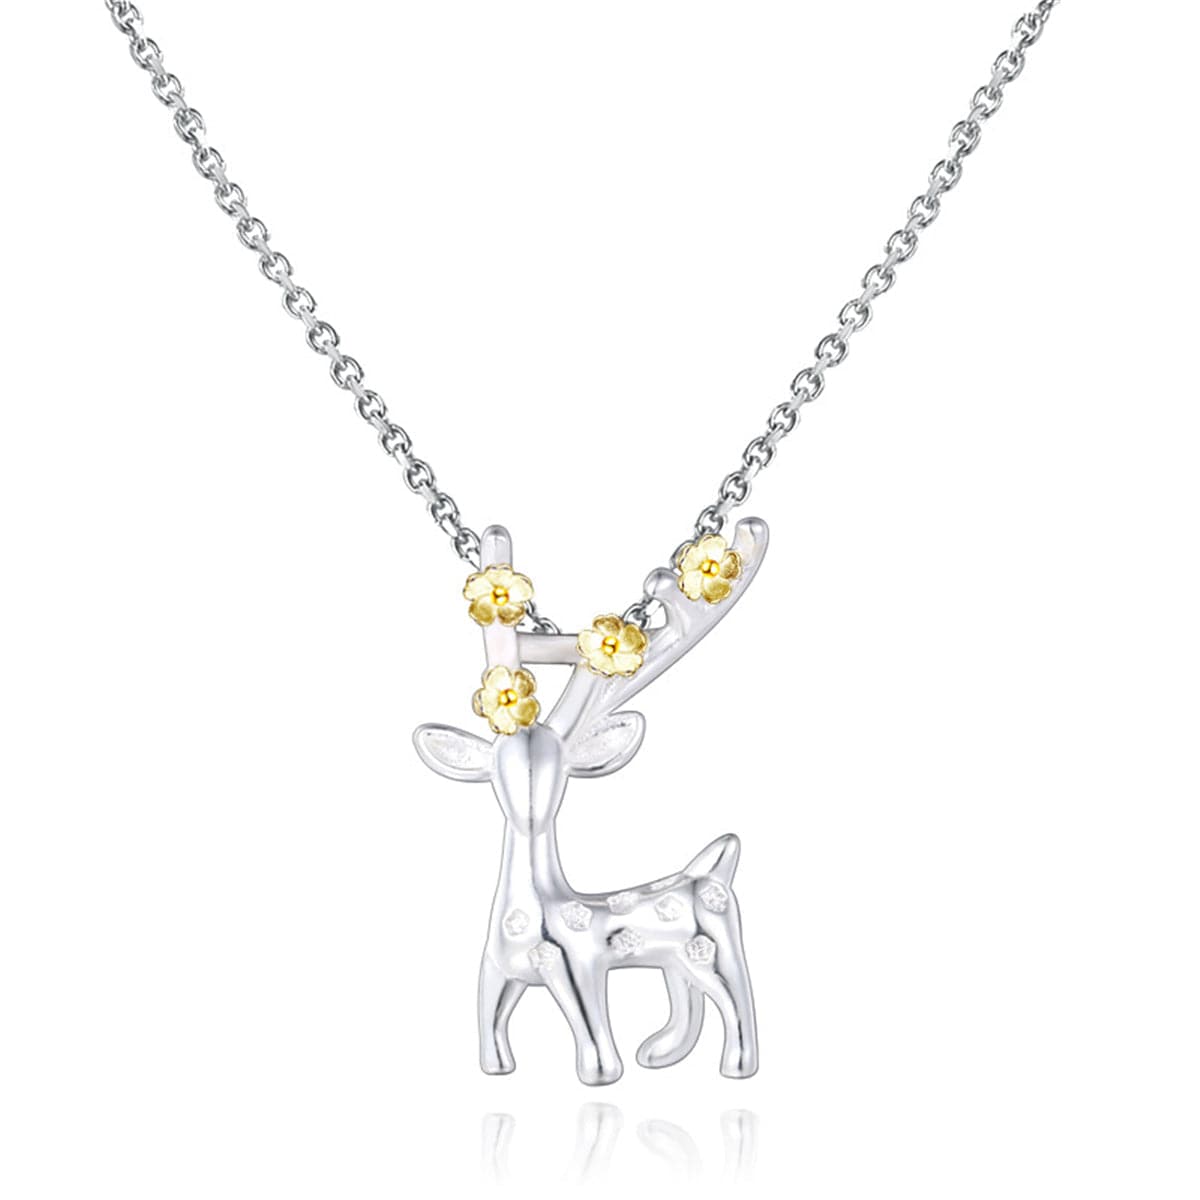 Two-Tone Deer Pendant Necklace